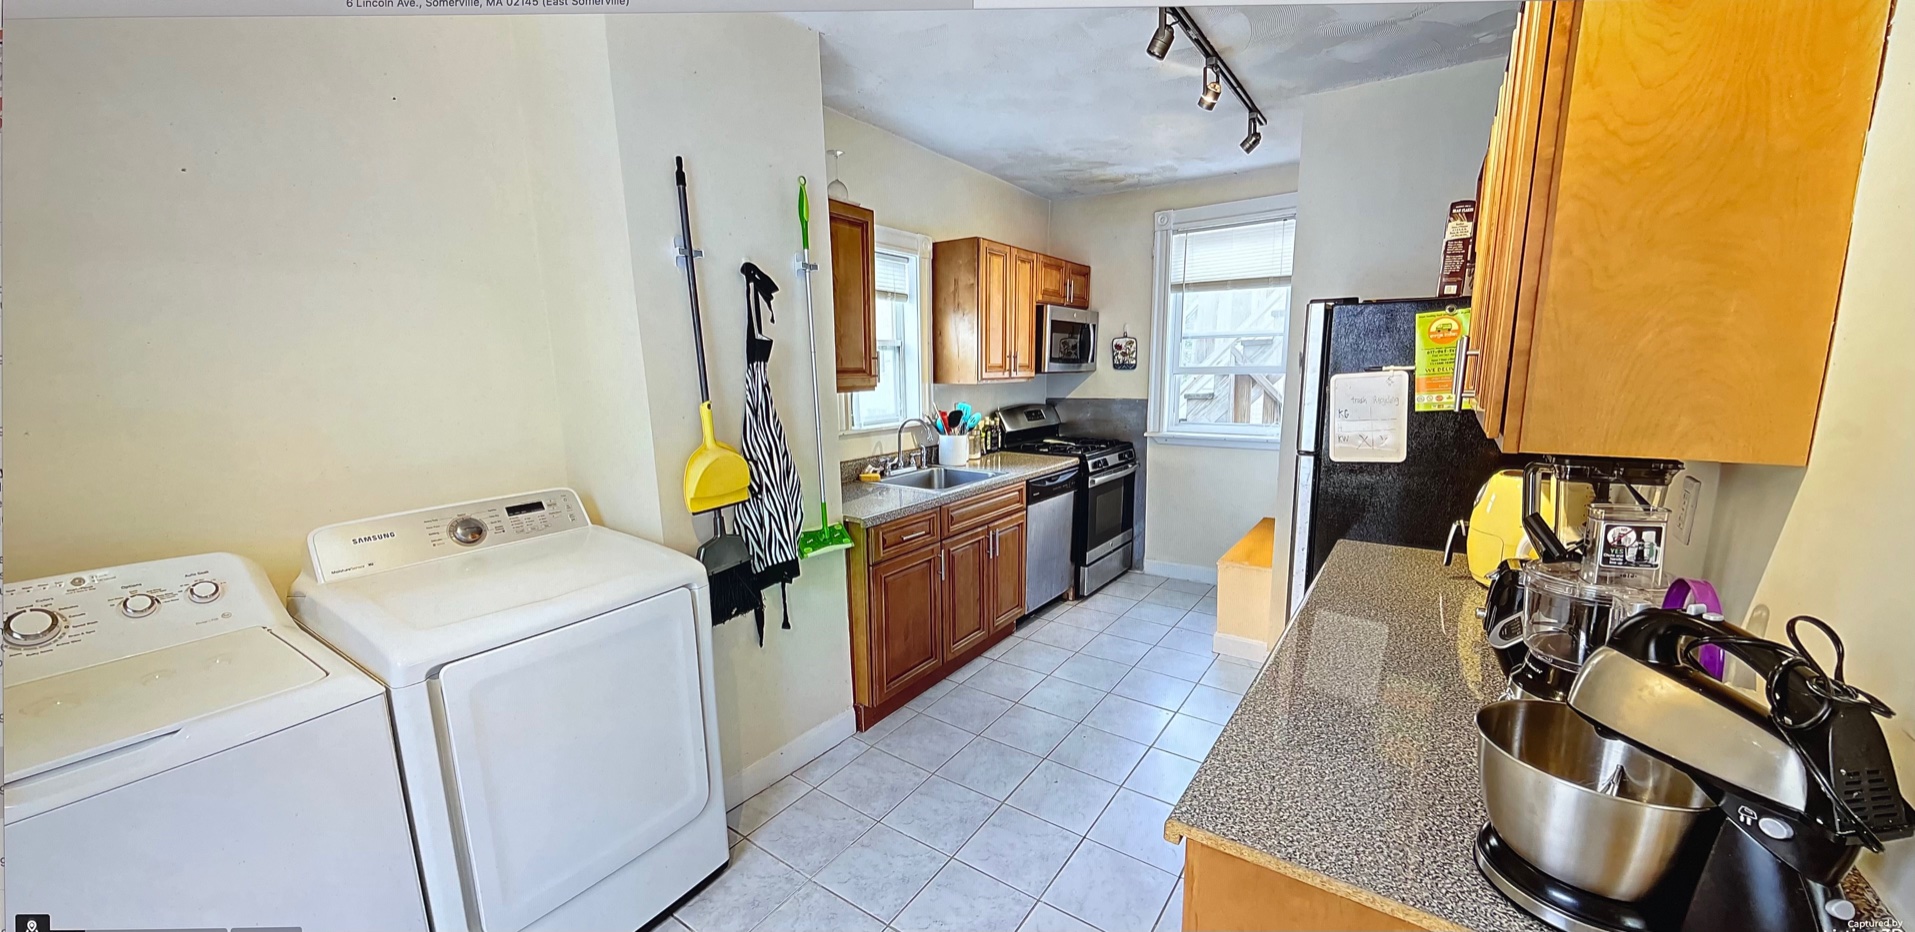 Photos of apartment on Evergreen Ave.,Somerville MA 02145